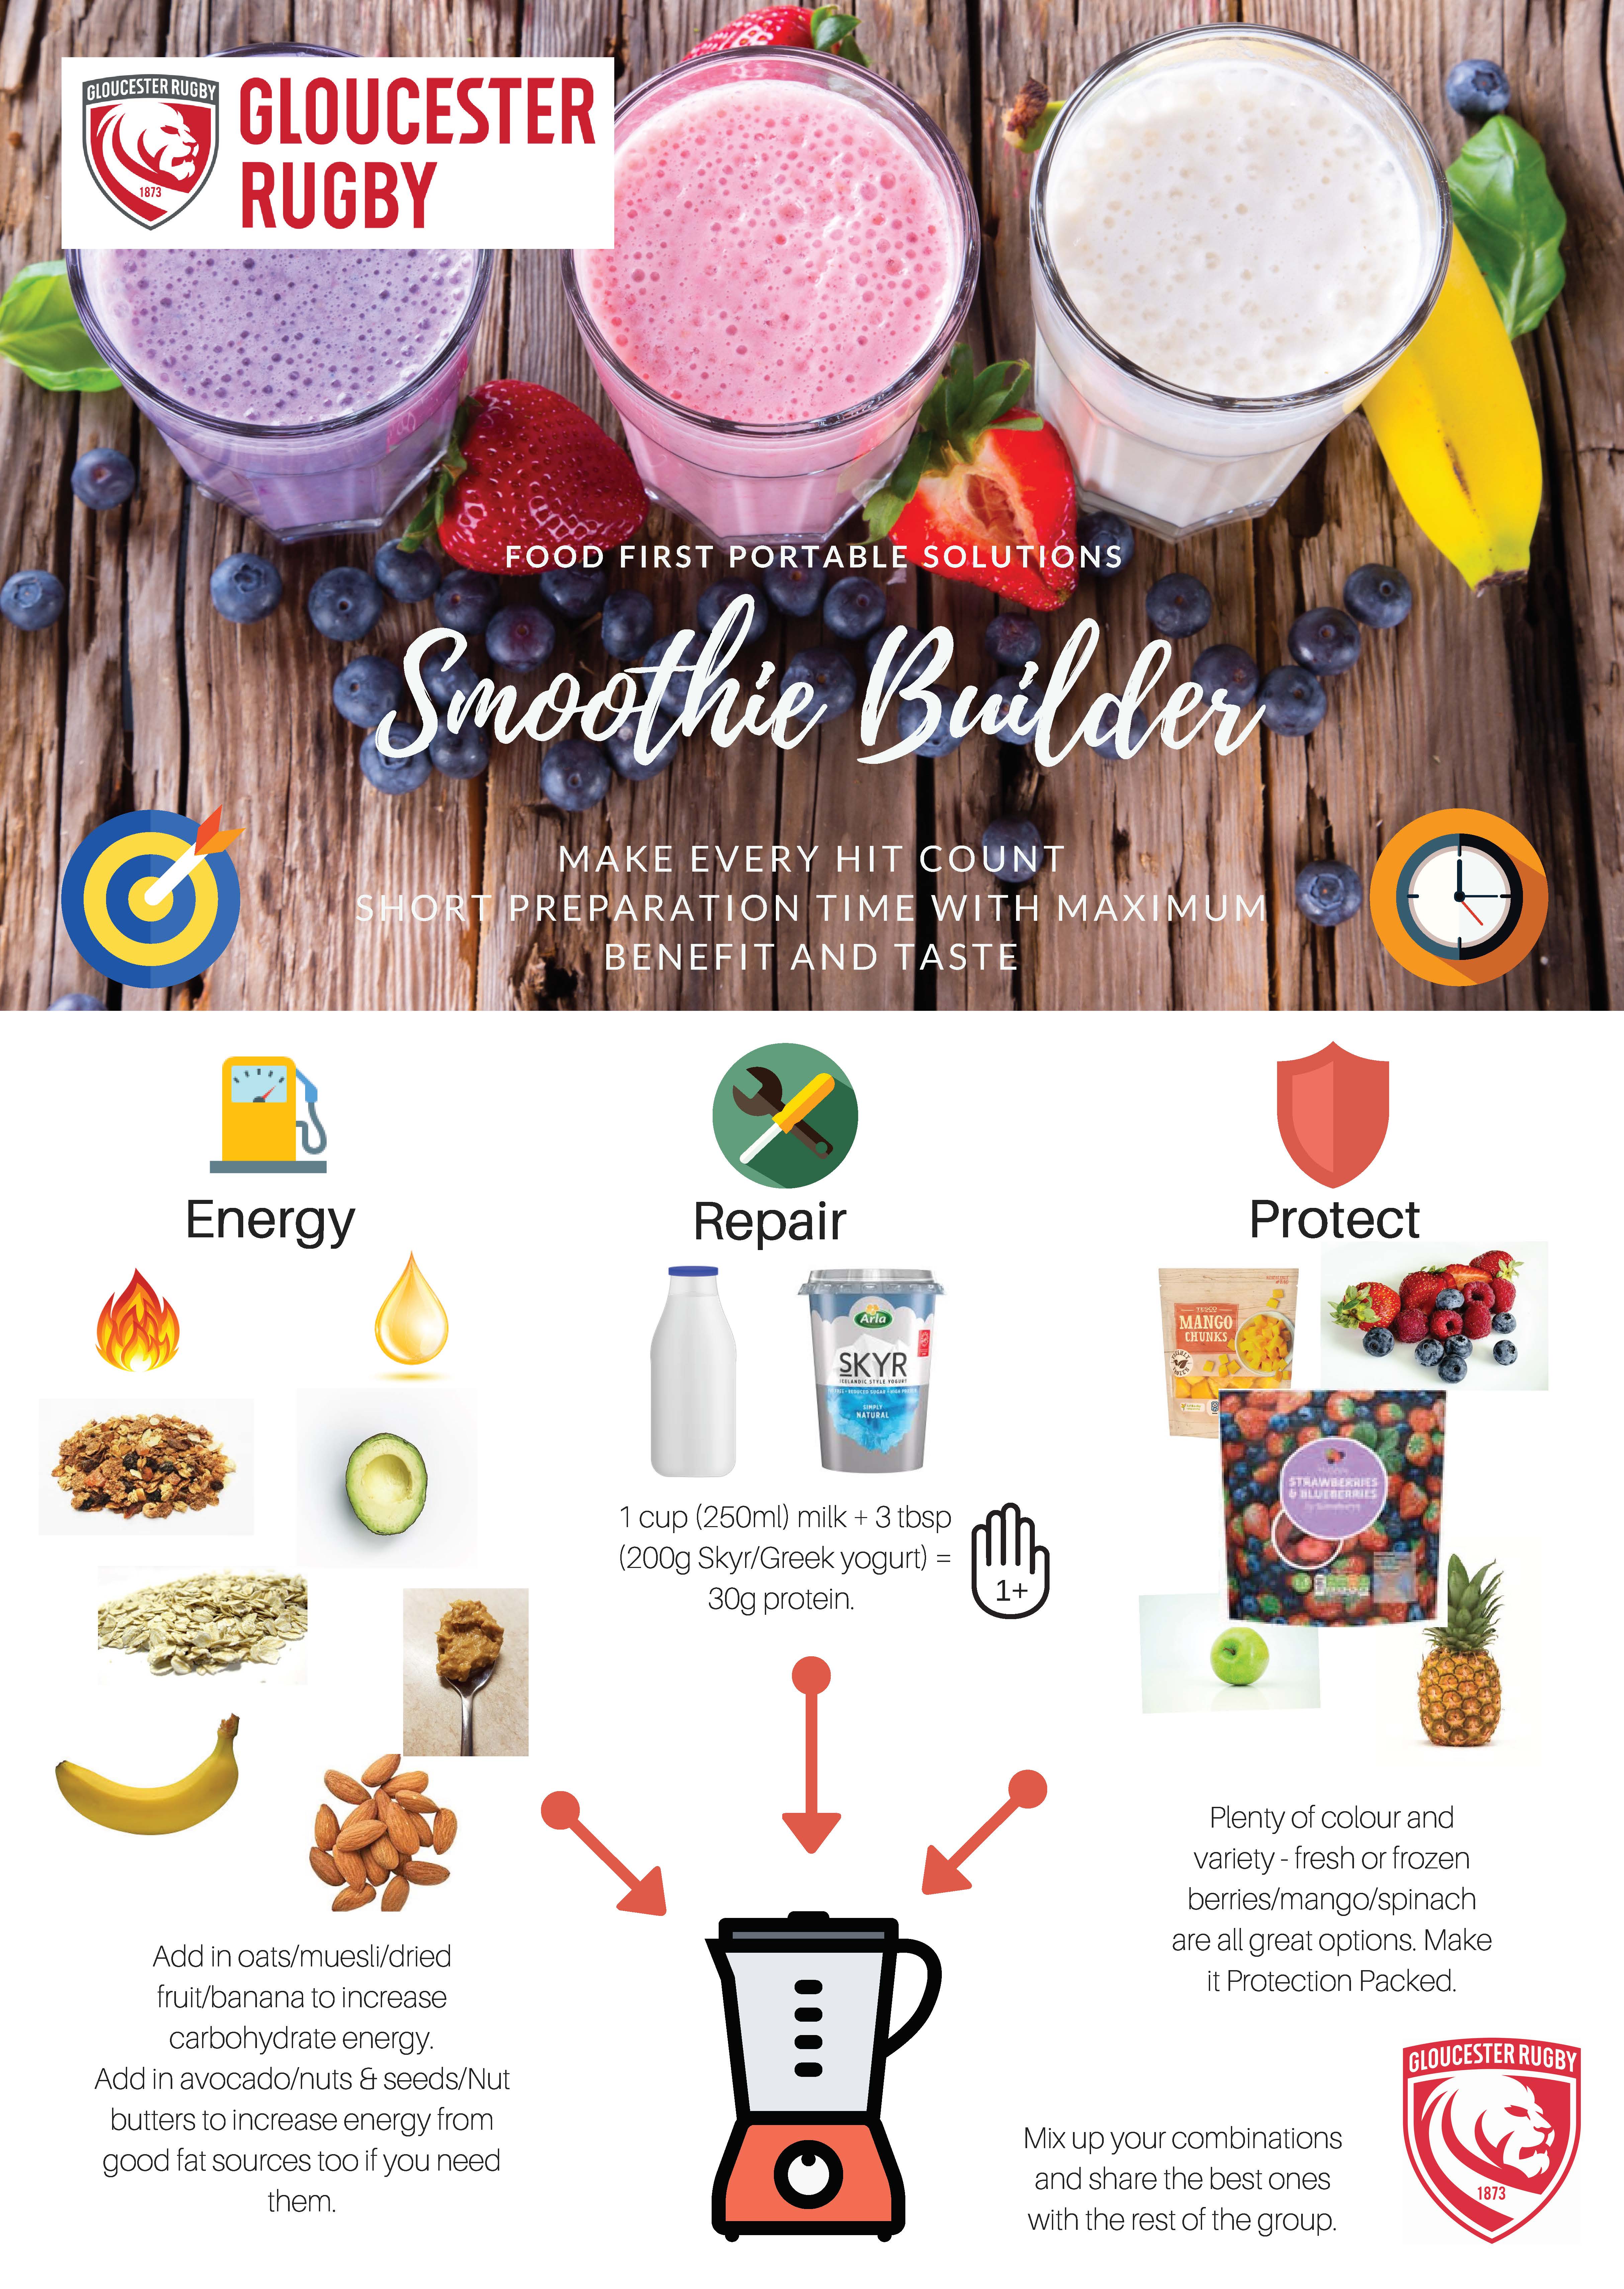 Image of a smoothie builder, including ingredients and instructions on how to make it